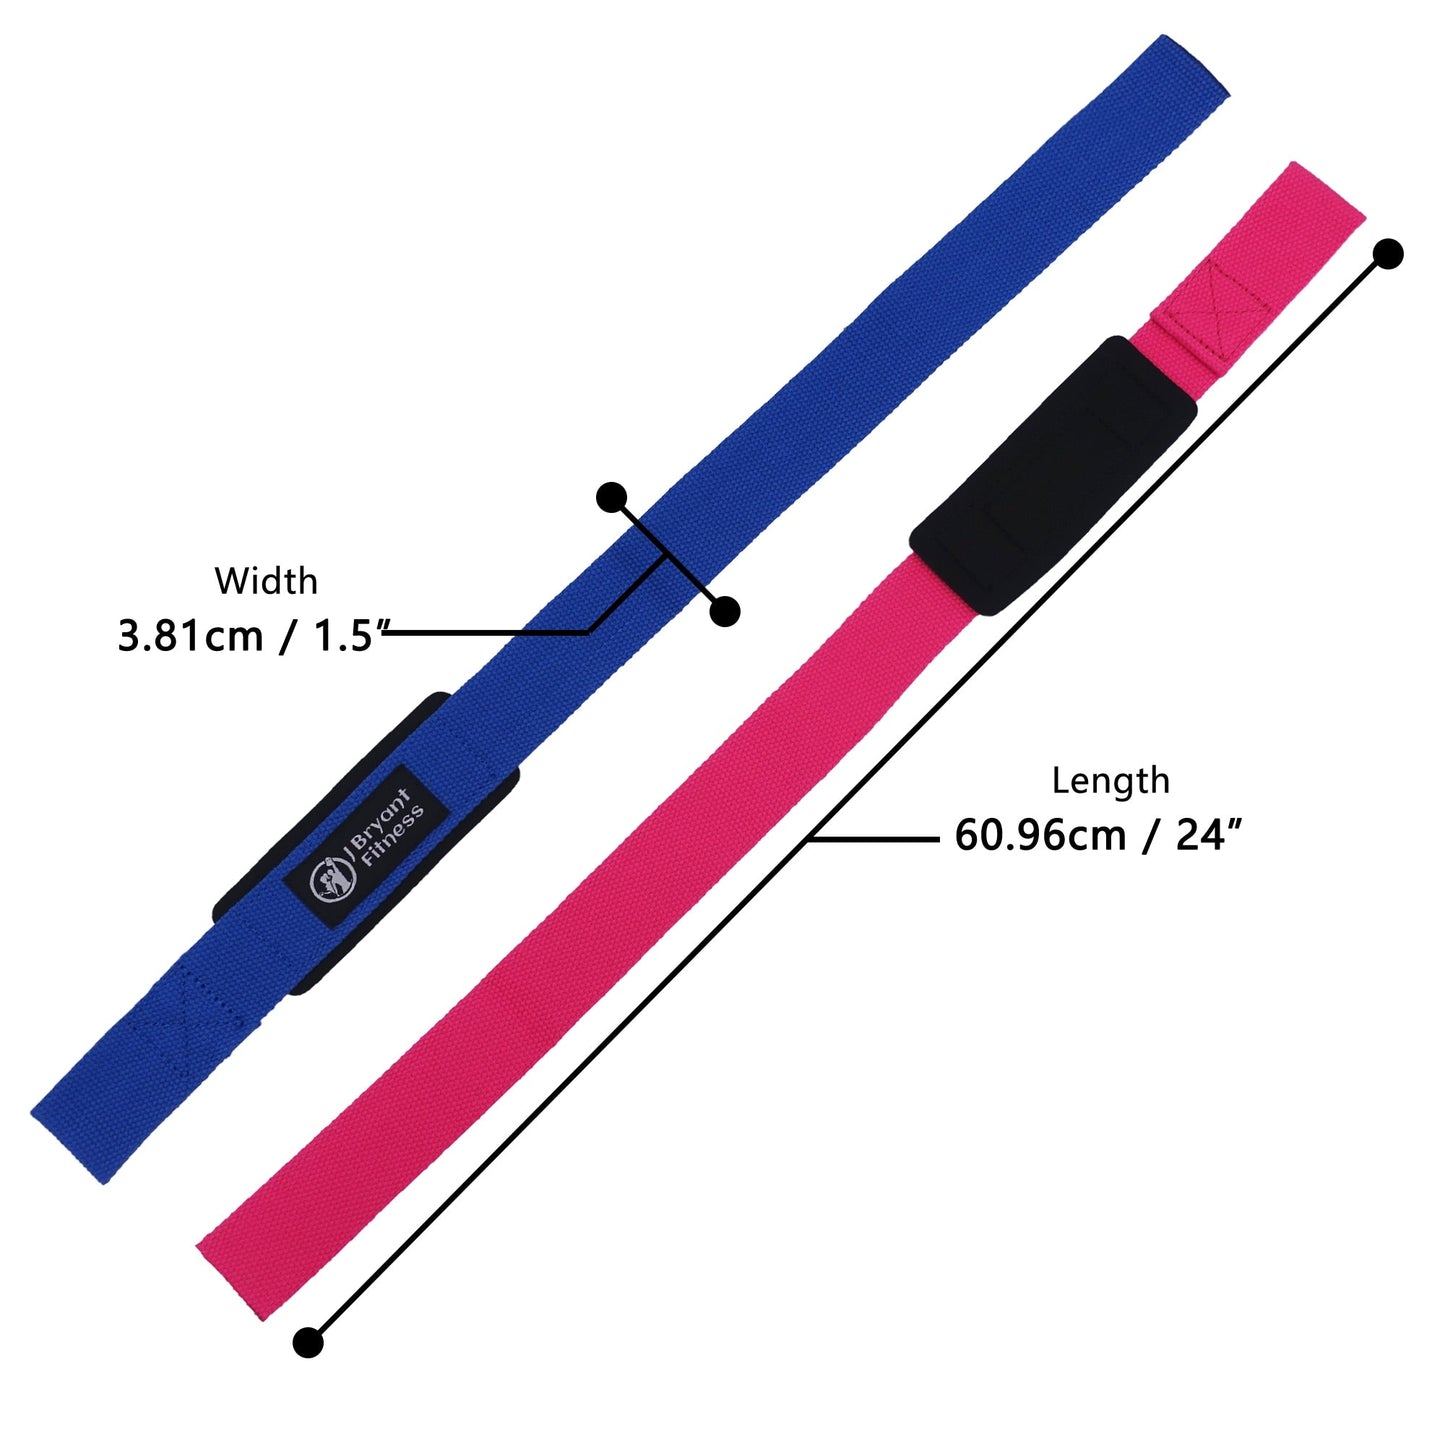 Red Reps blue neoprene padded Lasso Weightlifting straps for bodybuilding, powerlifting, heavy deadlifting and grip support - product dimensions